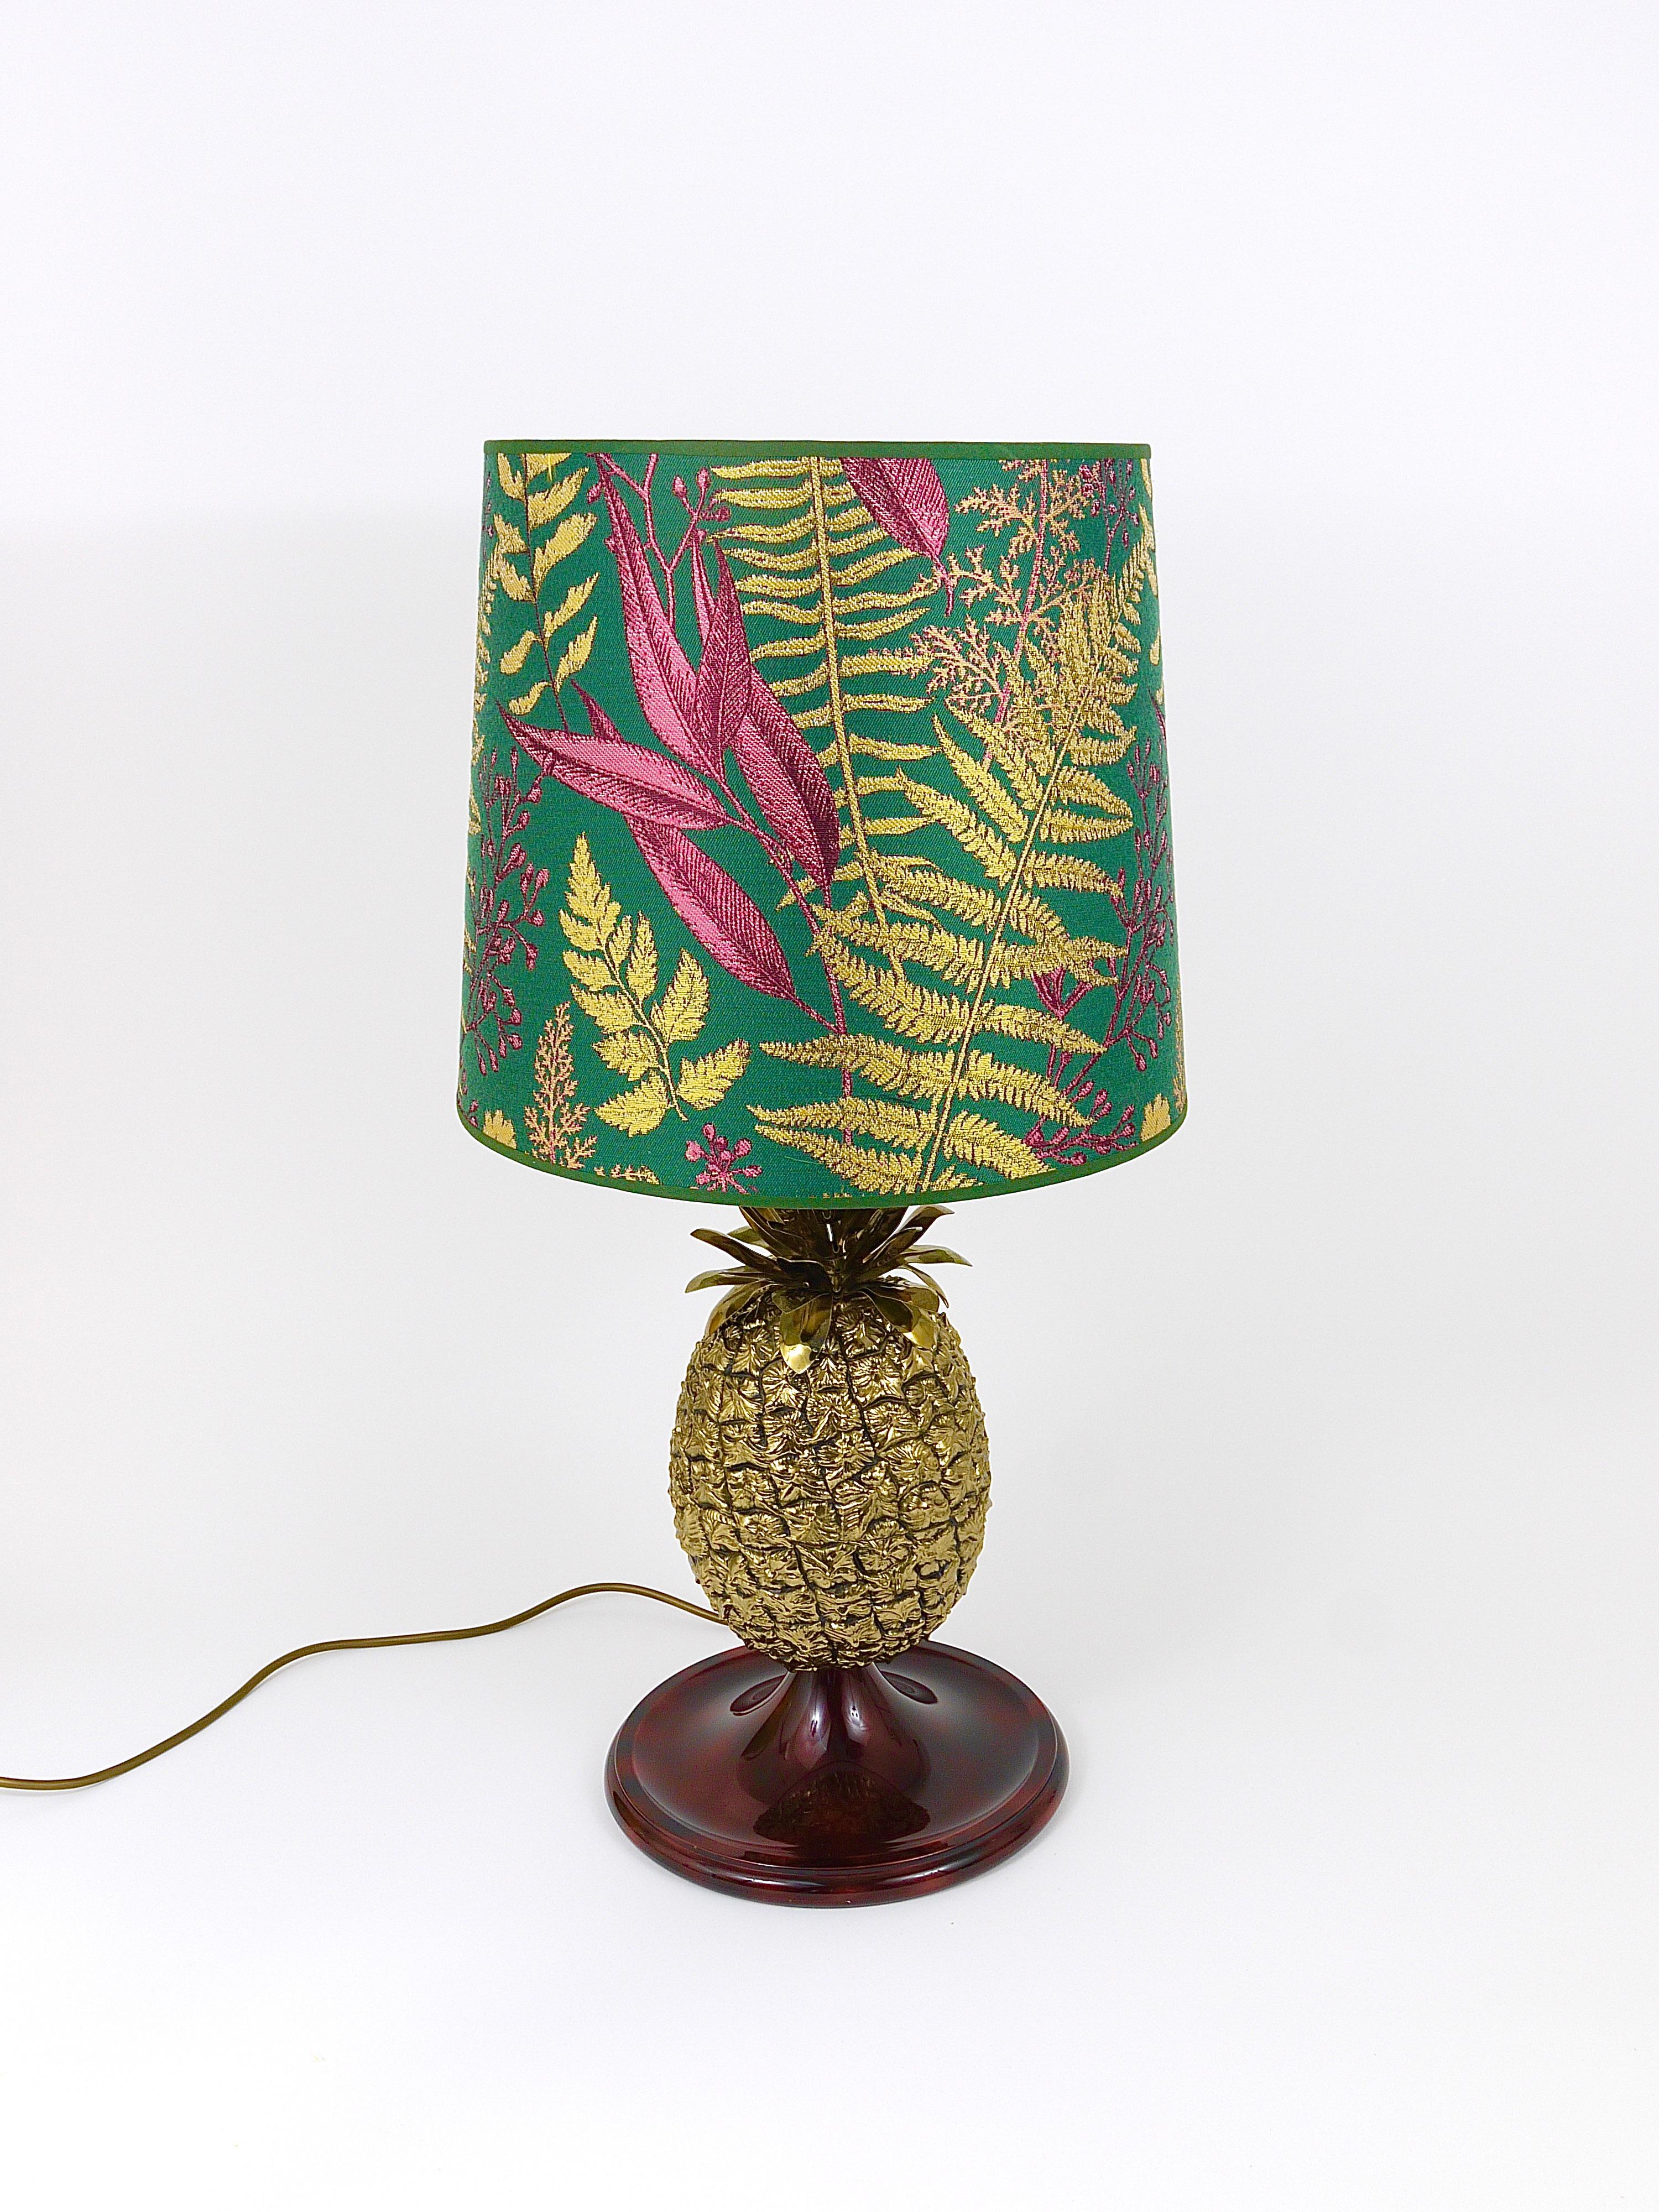 Italian Mauro Manetti Hollywood Regency Pineapple Brass Table Lamp, Italy, 1970s For Sale